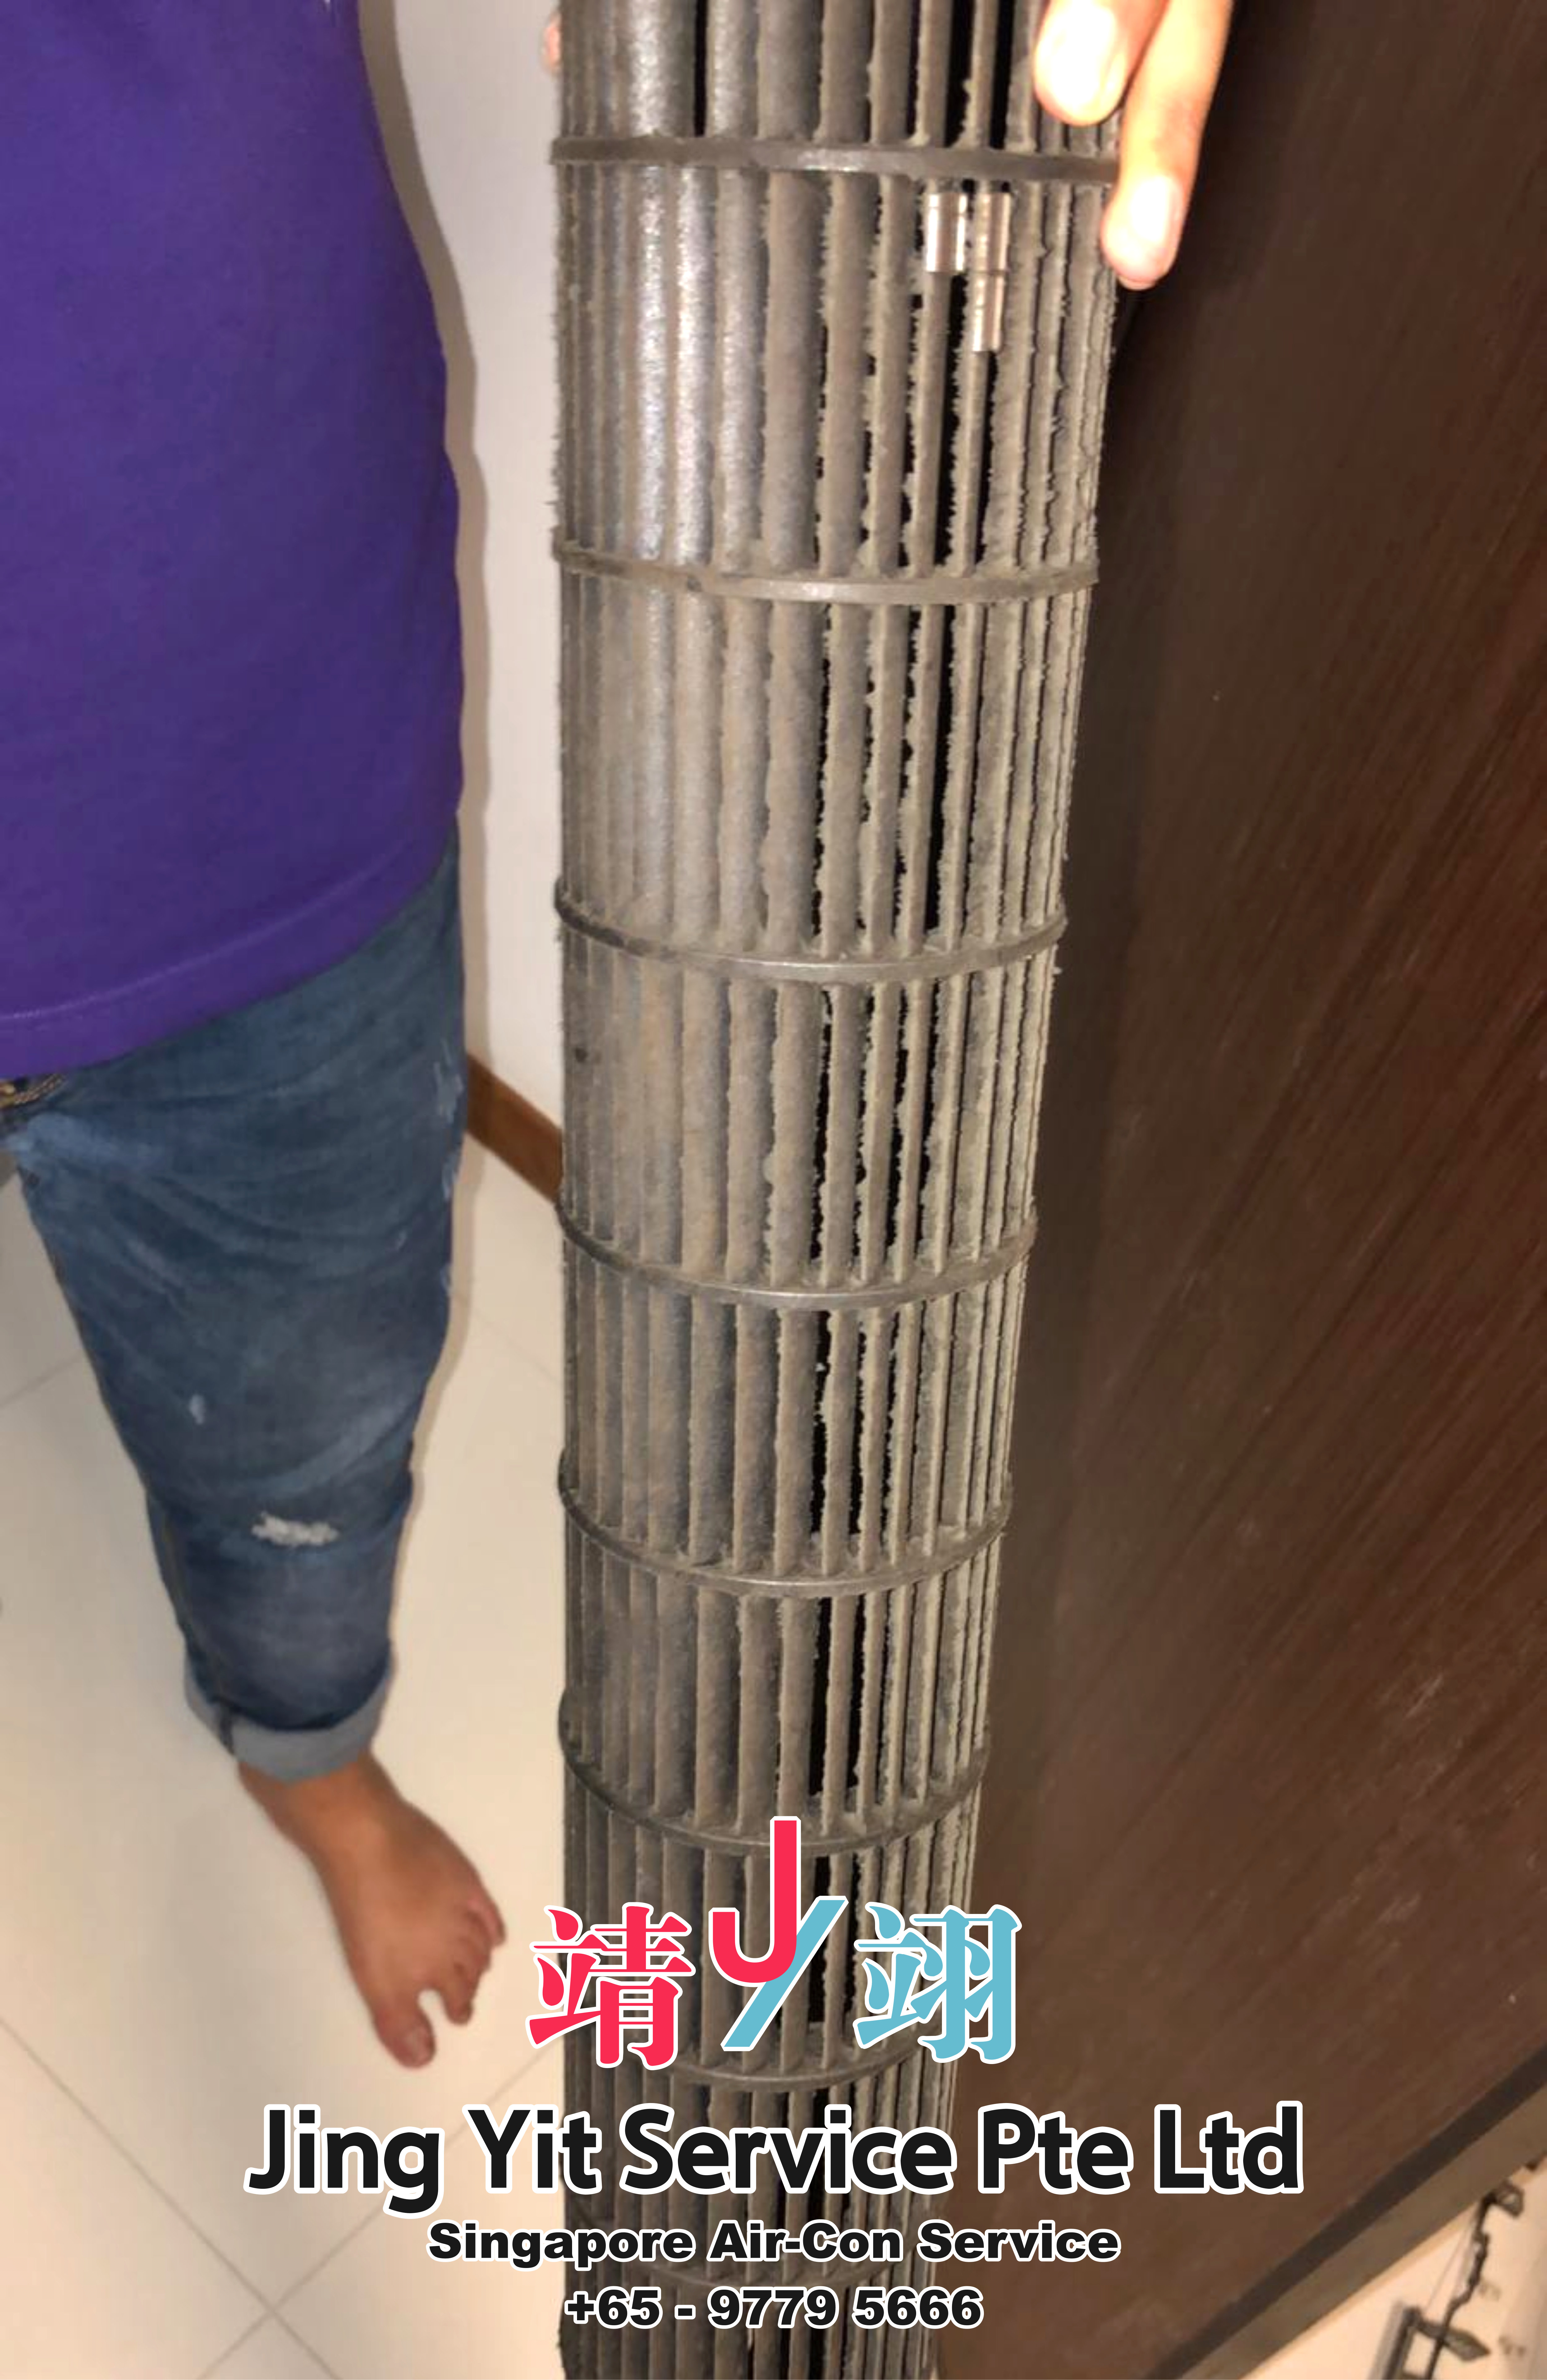 Singapore AirCon Service Air Conditioning Cleaning Repairing and Installation Air-con Gas Refill Aircon Chemical Wash Singapore Jing Yit Service Pte Ltd A03-04